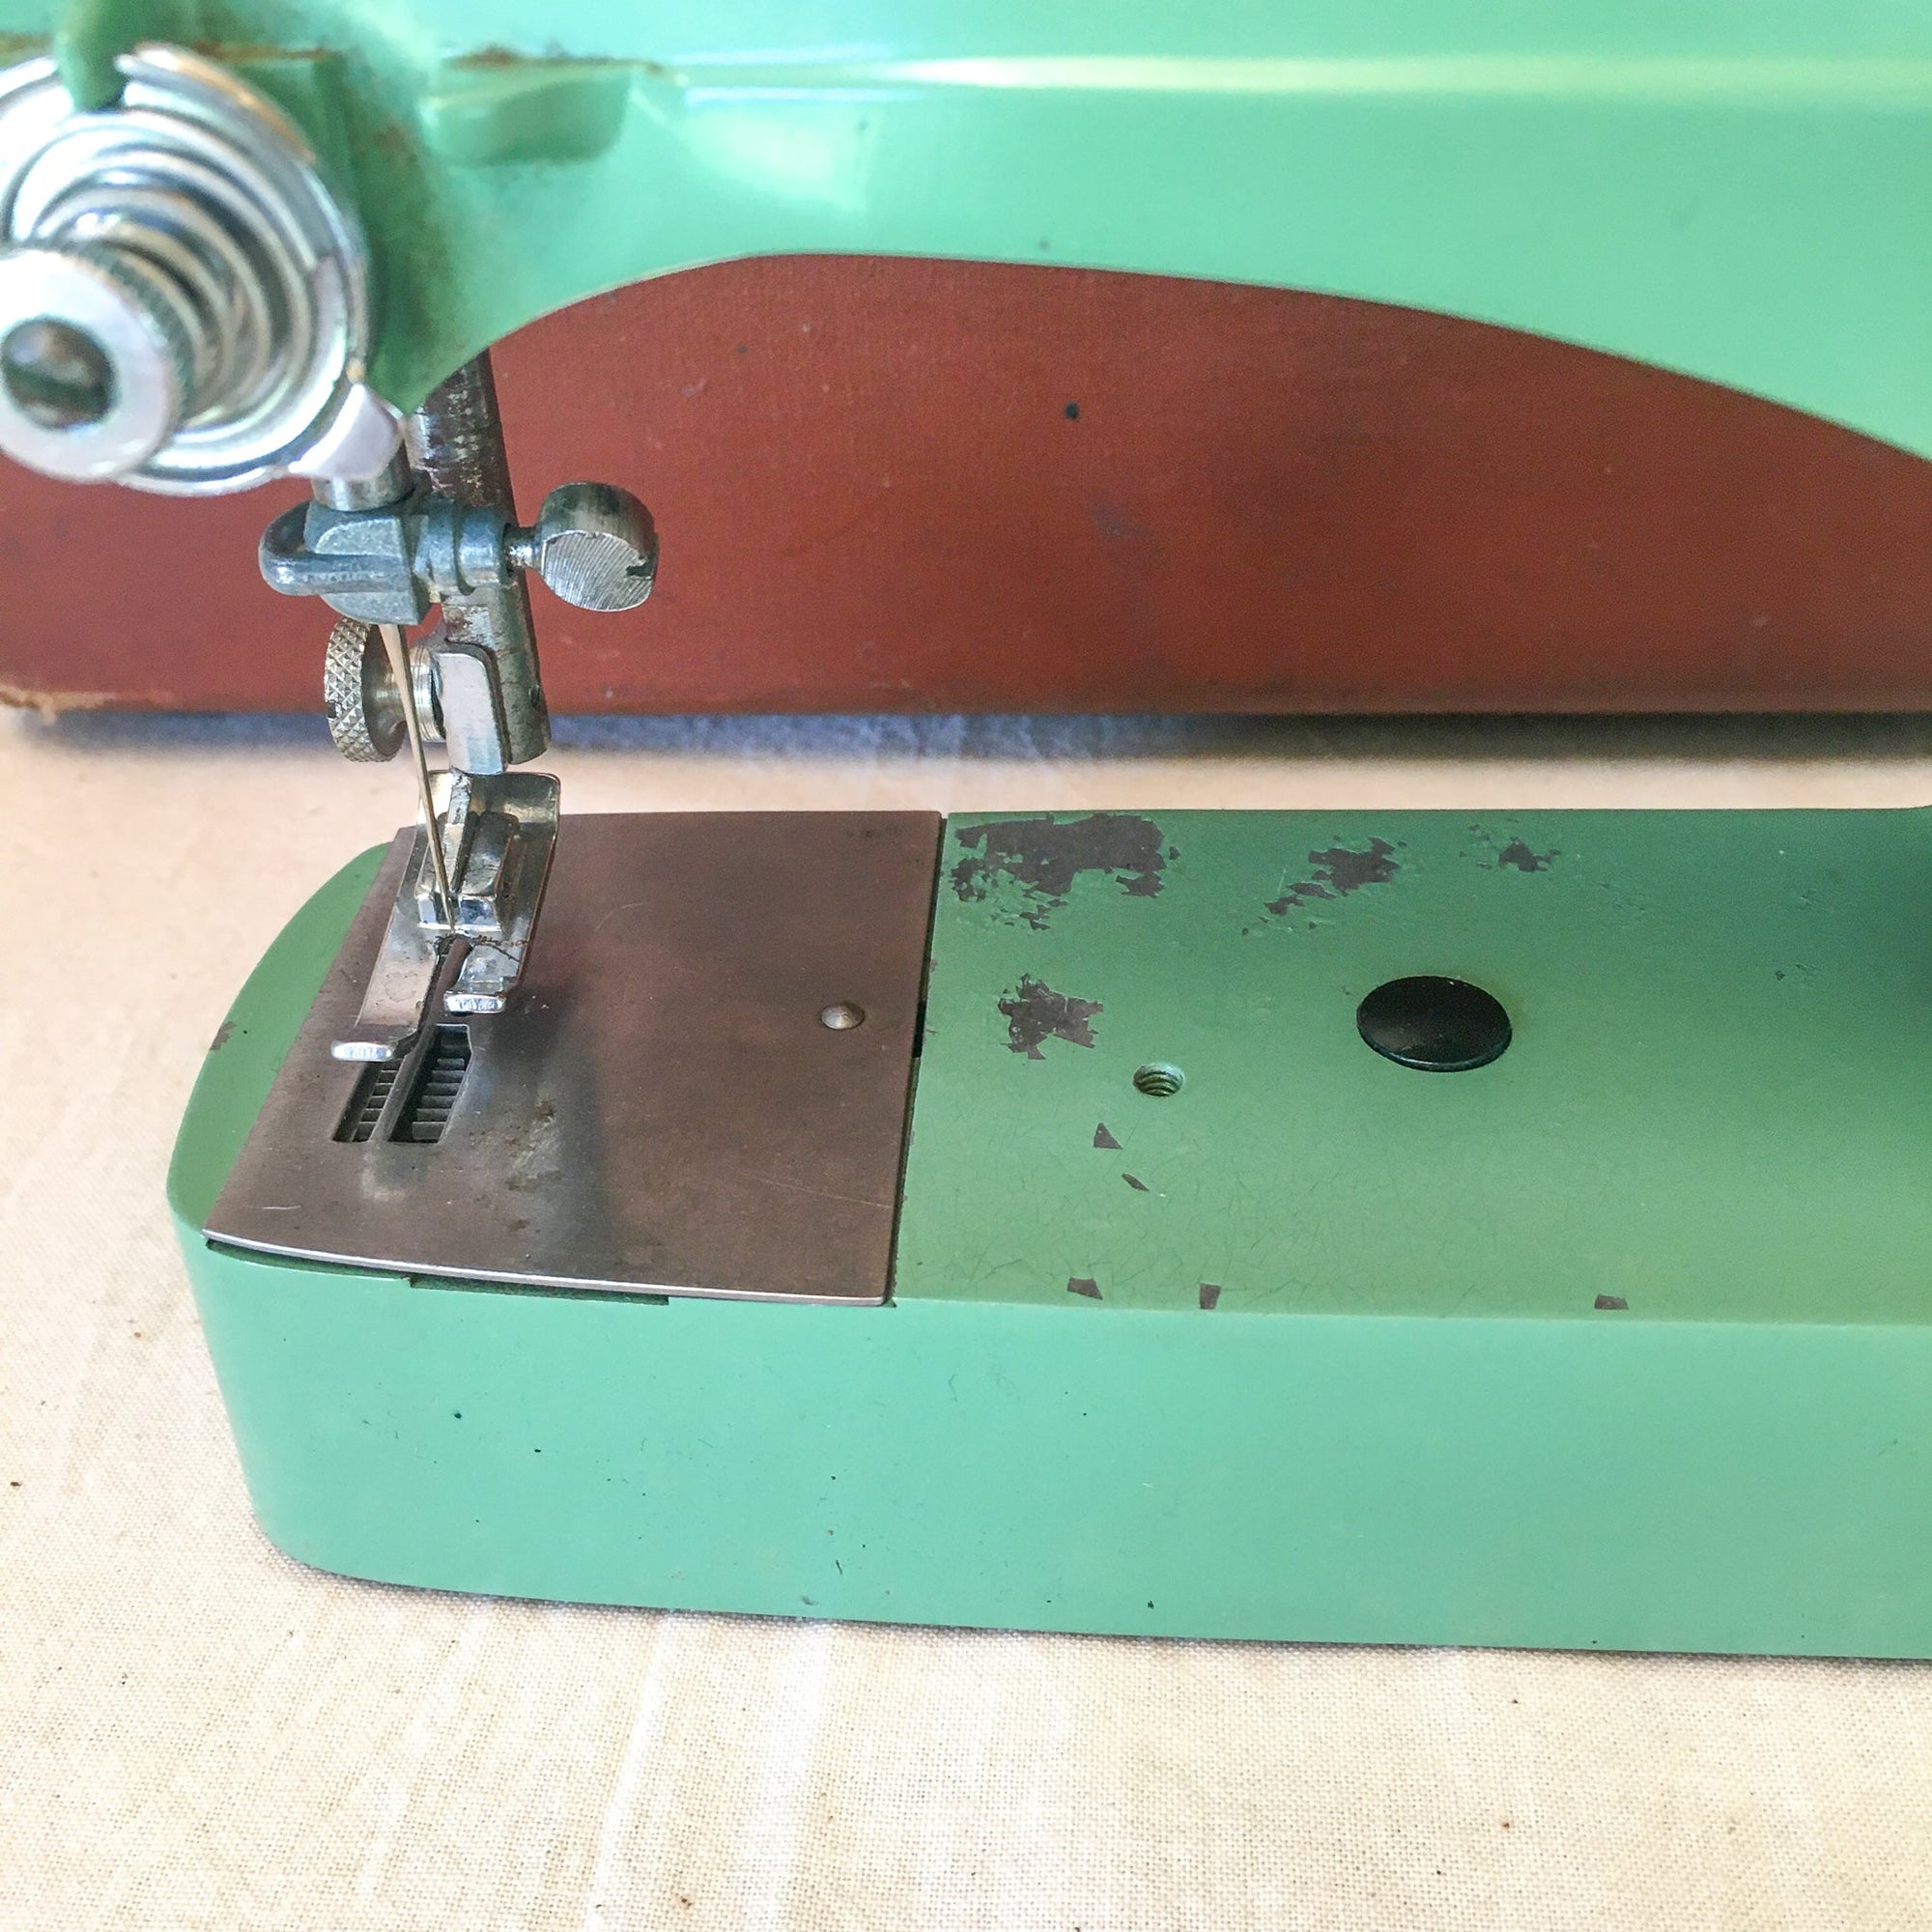 1950’s Bell Sewing Machine with Original Case, Attachments and Accessories